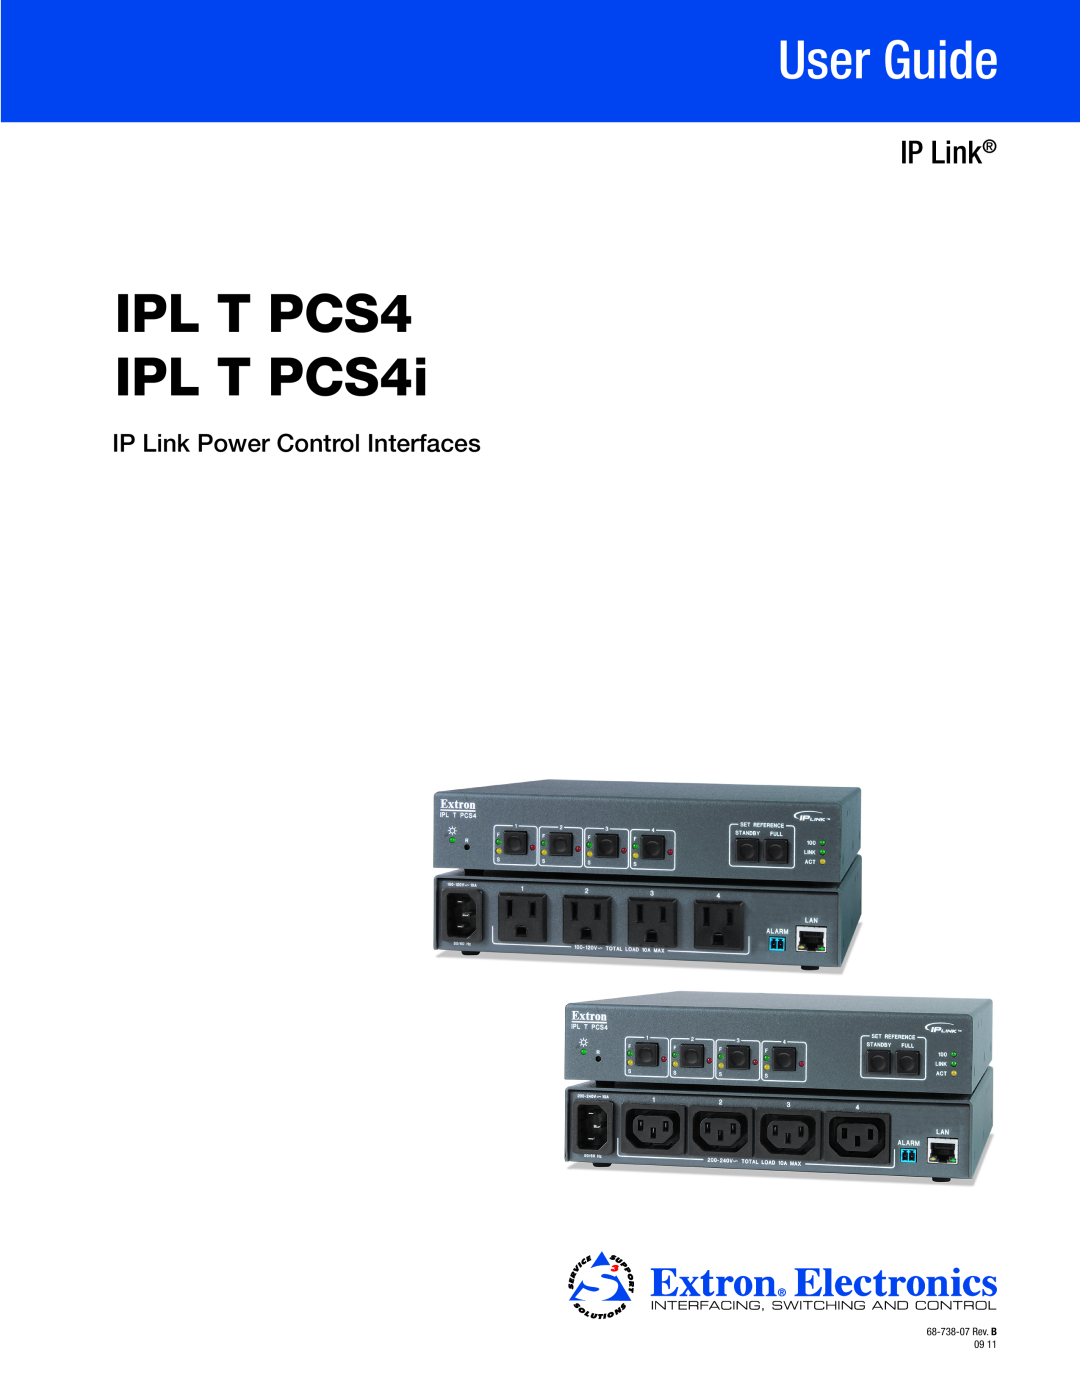 Extron electronic IPL T PCS4 specifications Ethernet control interface, AC control interface, Alarm relay control, General 